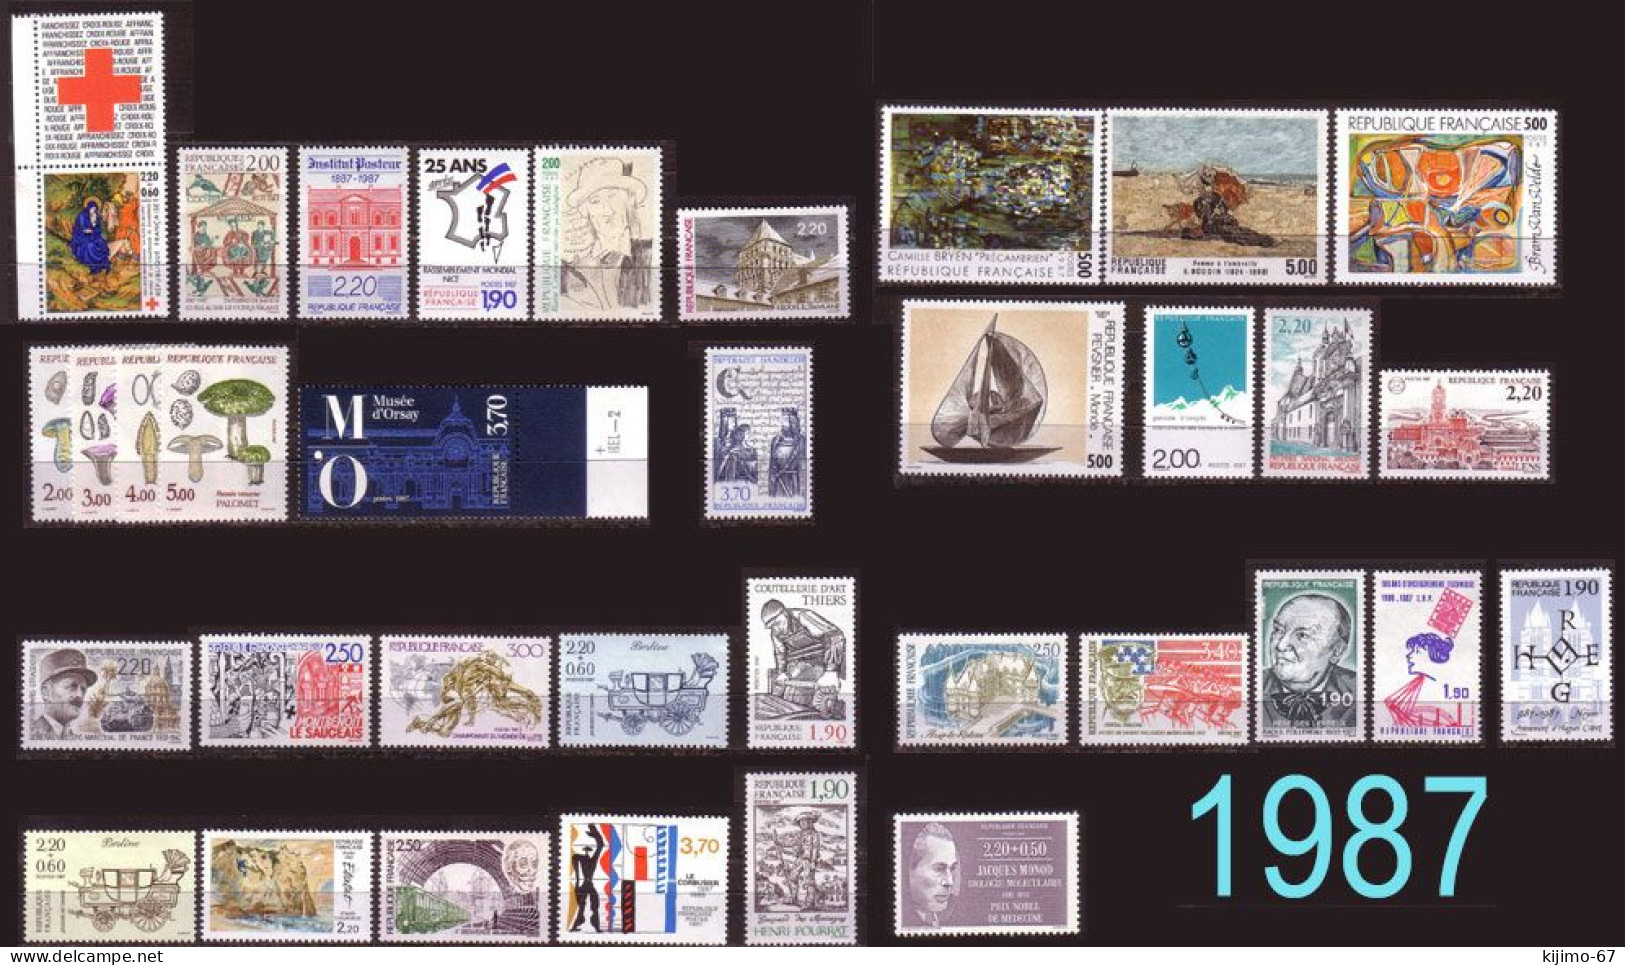 FRANCE ANNEE 1987, 35 TIMBRES NEUFS - Lots & Kiloware (mixtures) - Max. 999 Stamps